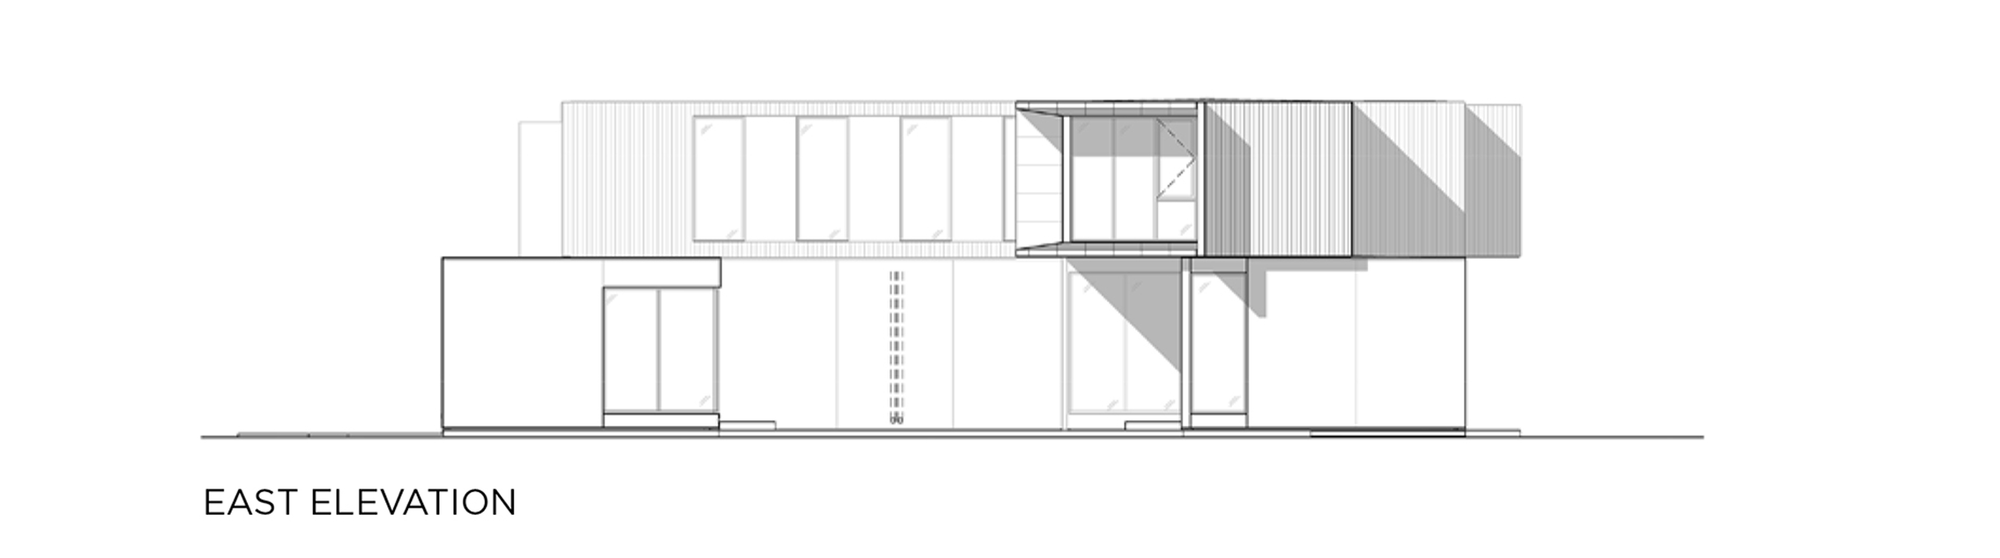 baulinder-haus-hufft-projects_east_elevation